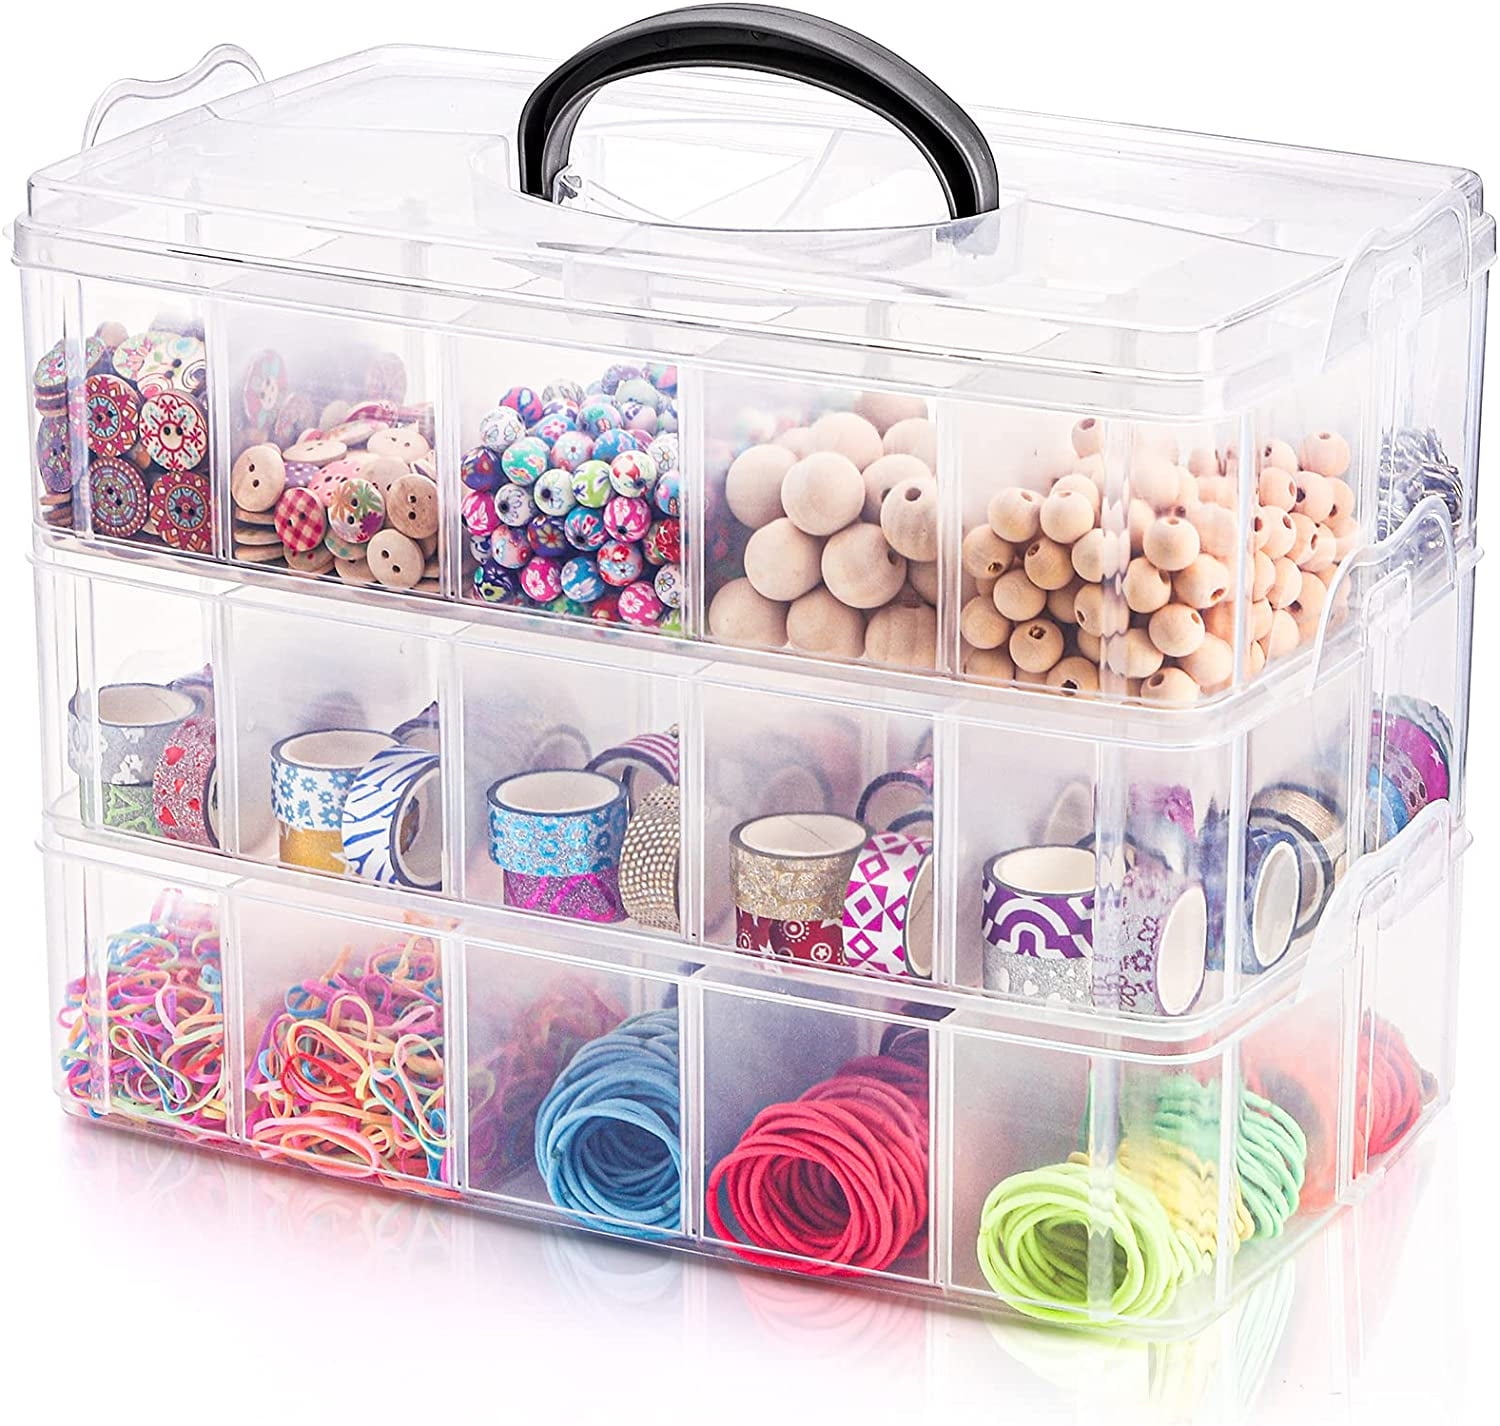 Craft Storage Organizer,Casewin Sewing Box,3-Tier Plastic Organizer Box  with Dividers, Storage Containers for Organizing Art Supplies, Fuse  Beads,Washi Tape, Jewelry,Tool,Kids Toy,Pink 